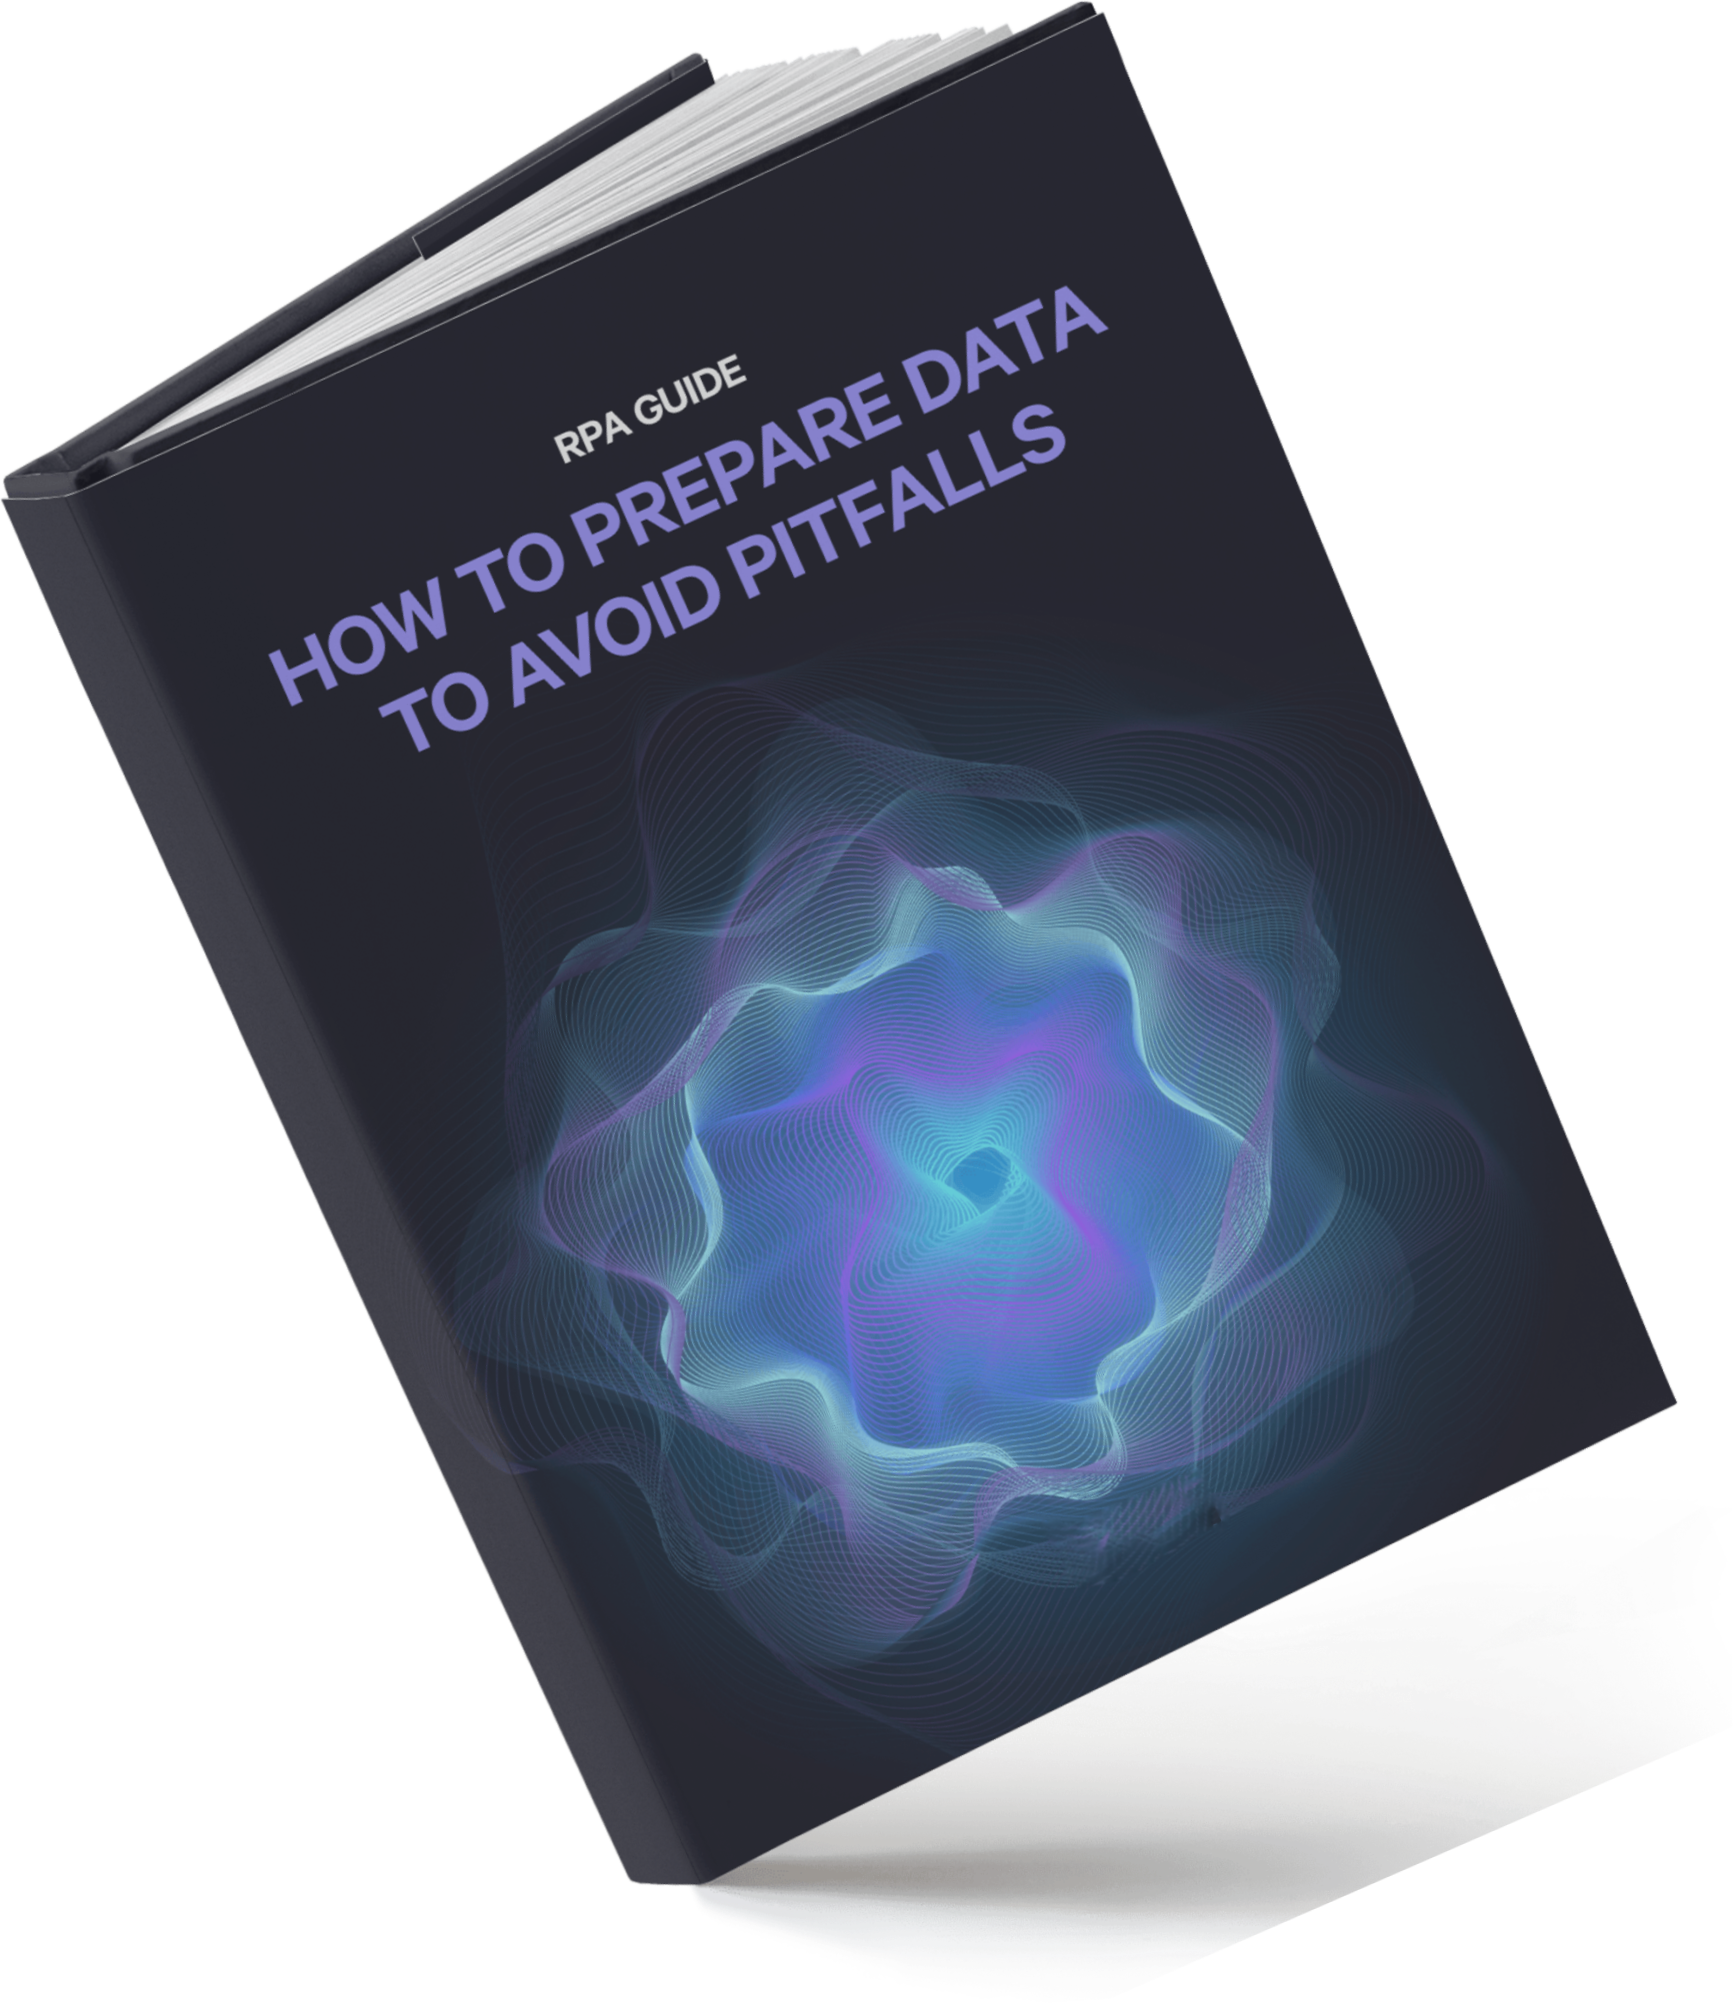 rpa-guide-how-to-prepare-data-to-avoid-pitfalls